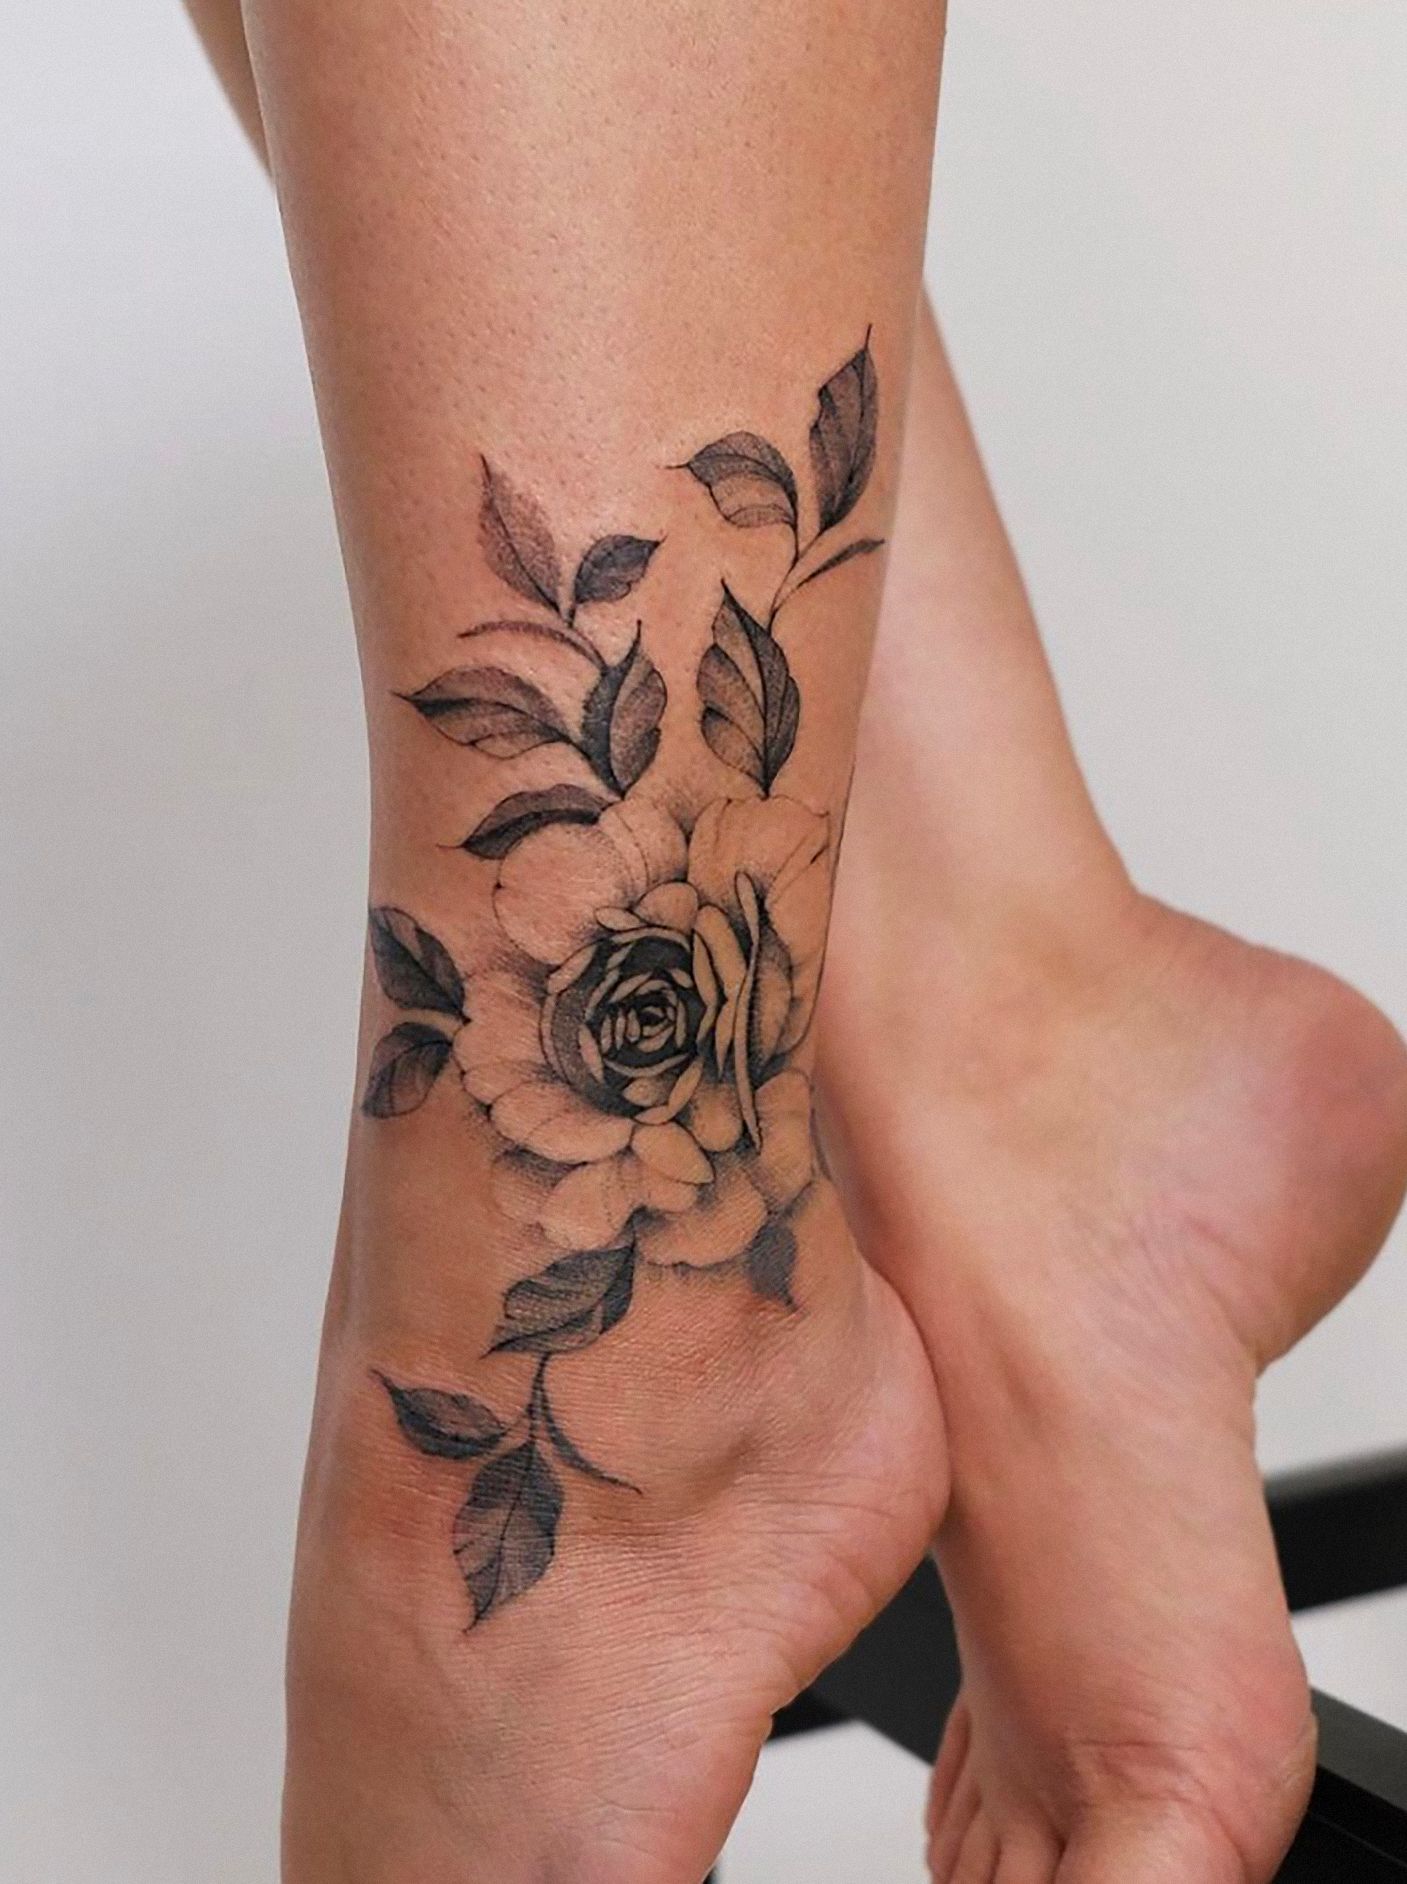 40 Gorgeous And Stunning Ankle Floral Tattoo Ideas For Your Inspiration -  Women Fashion Lifestyle Blog Shinecoco.com | Ankle tattoos for women, Foot  tattoos for women, Inner ankle tattoos